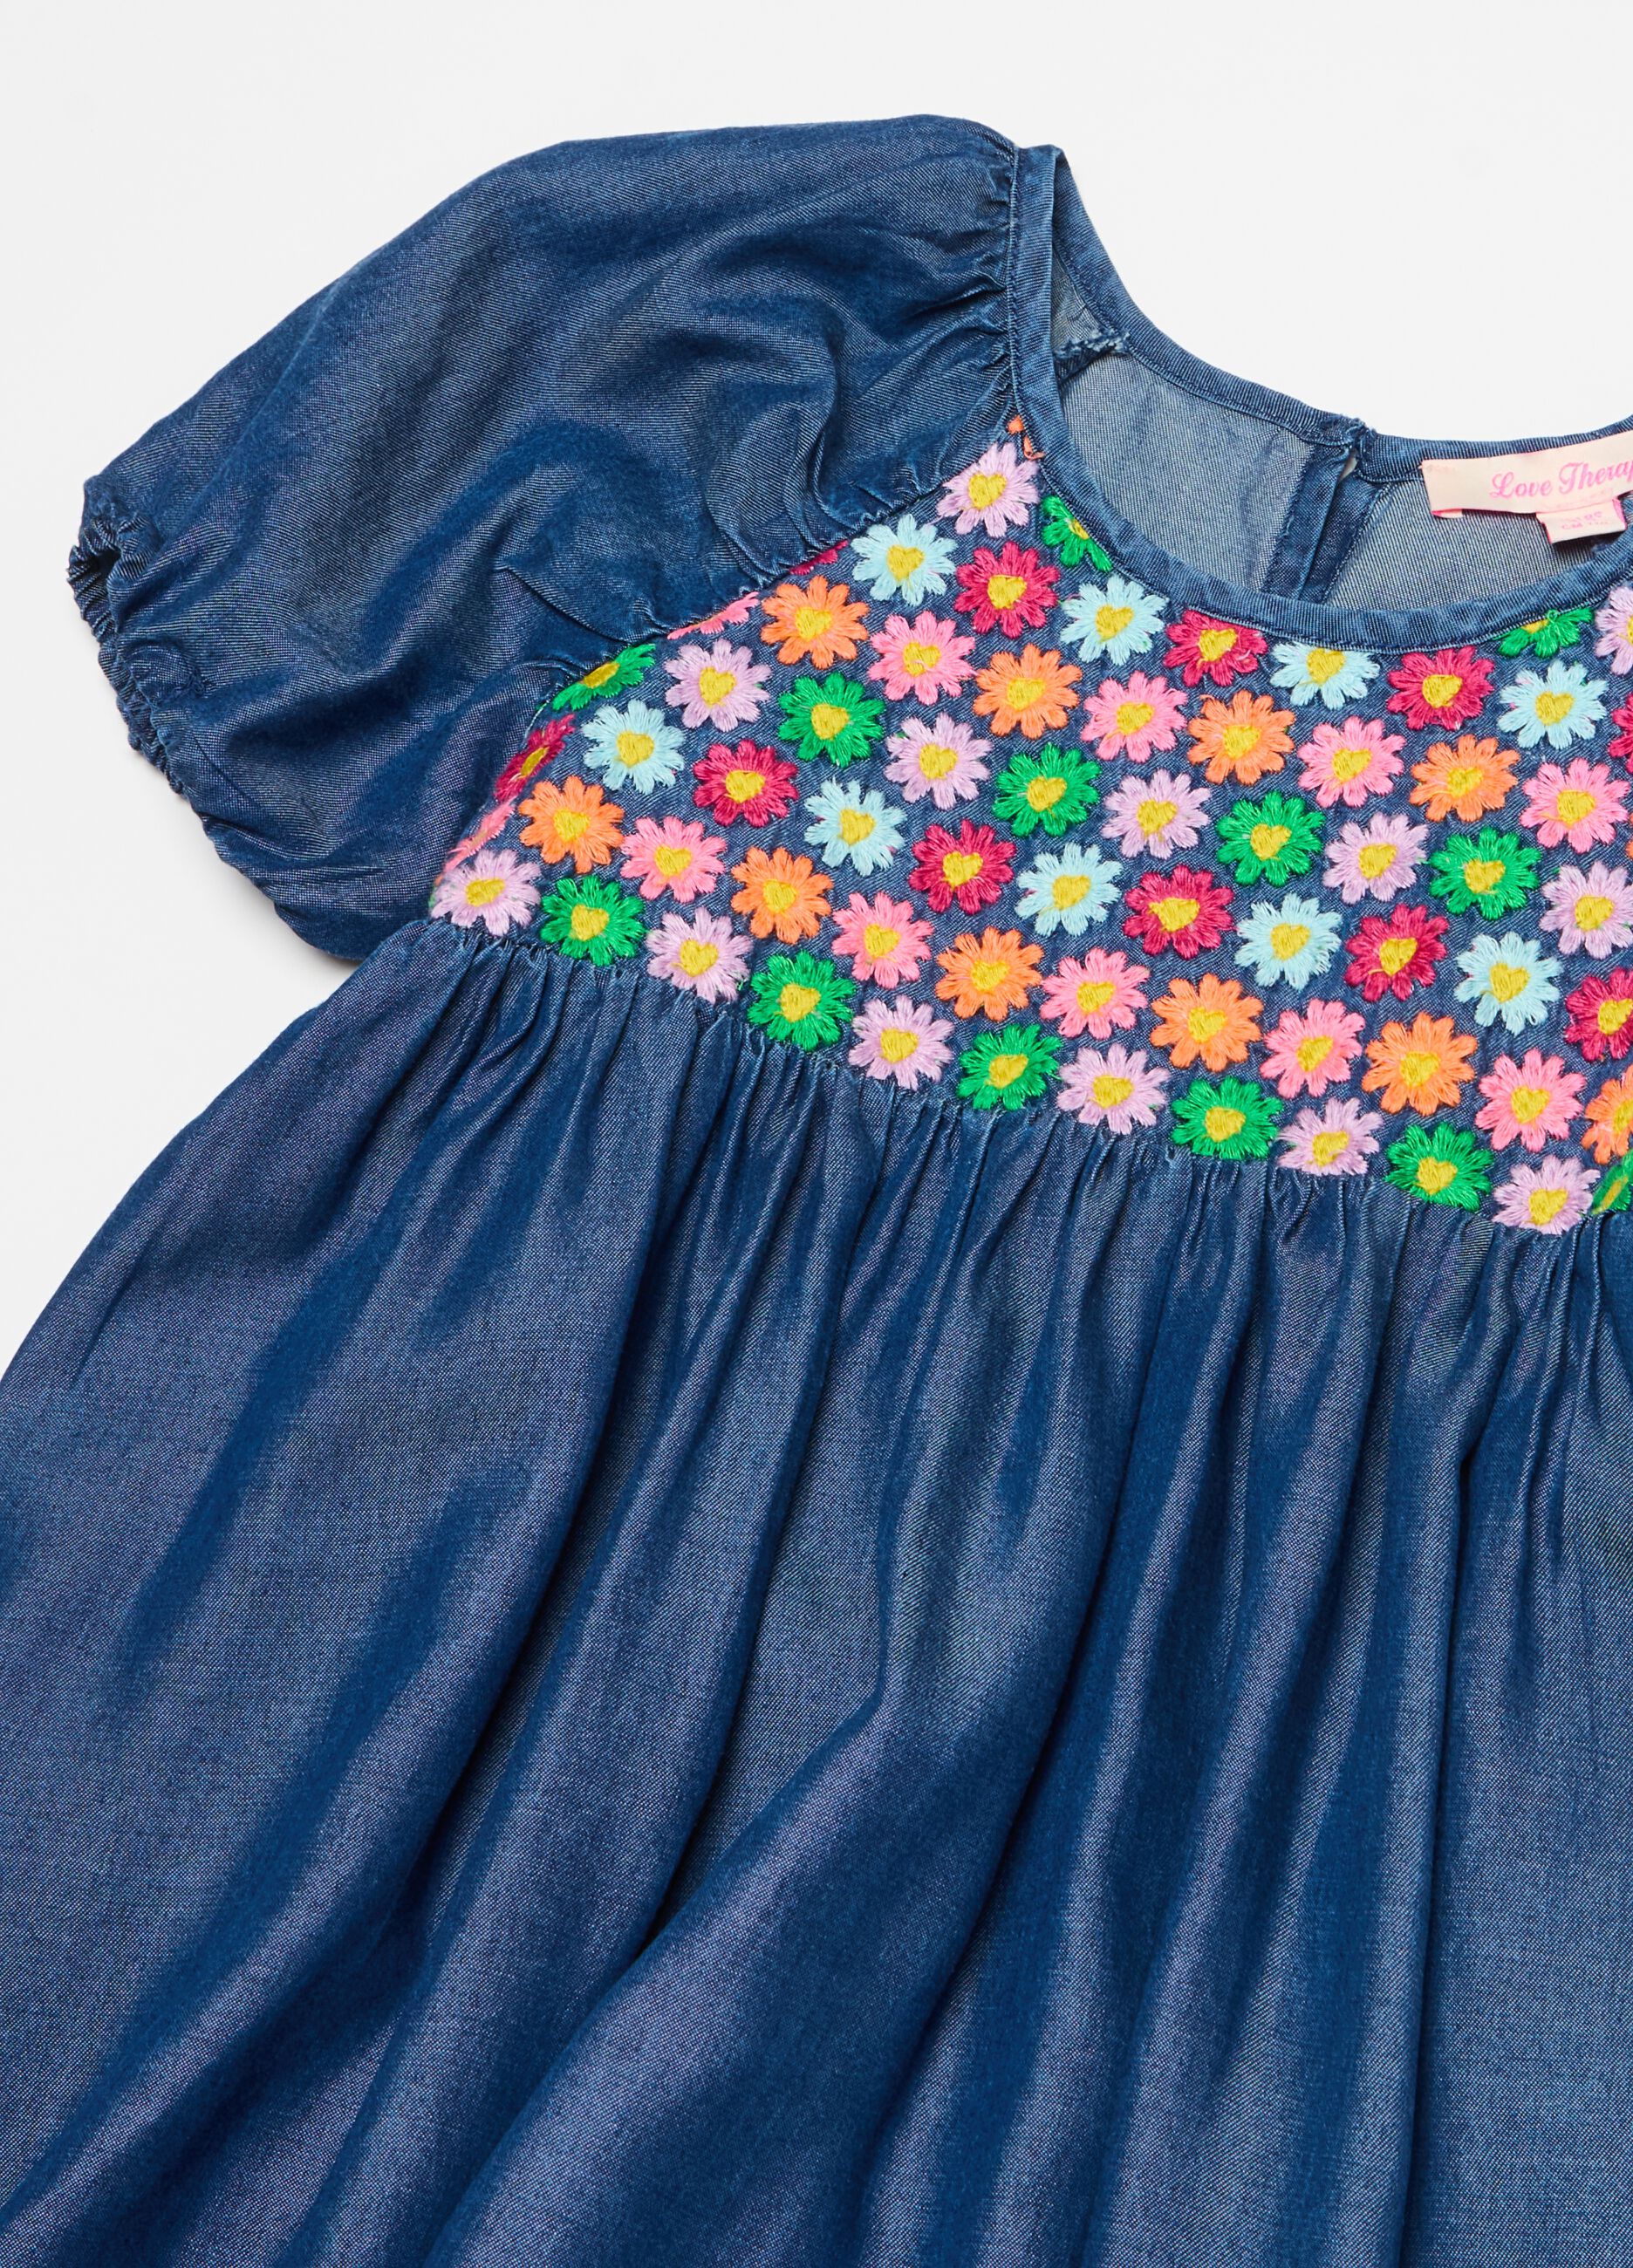 Denim-effect dress with flowers embroidery